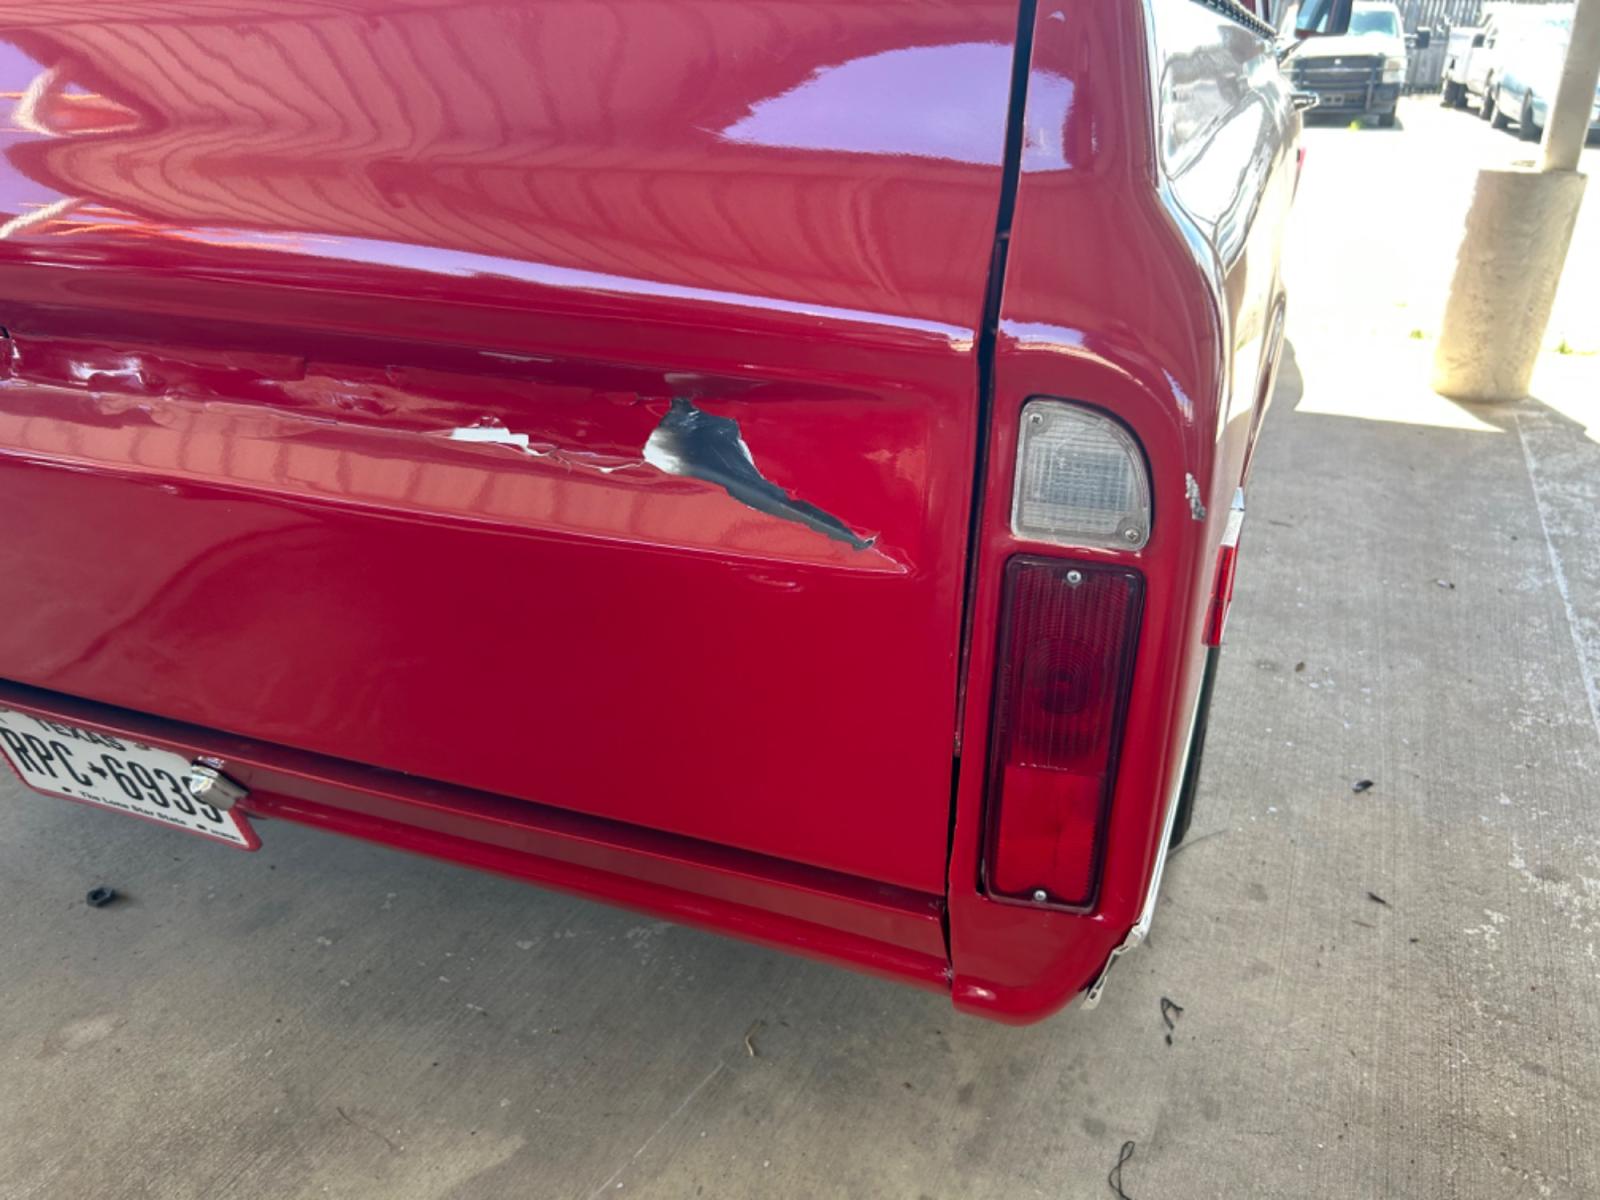 1972 Red Chevrolet C10 (CCE142A1201) , located at 1687 Business 35 S, New Braunfels, TX, 78130, (830) 625-7159, 29.655487, -98.051491 - Photo #2